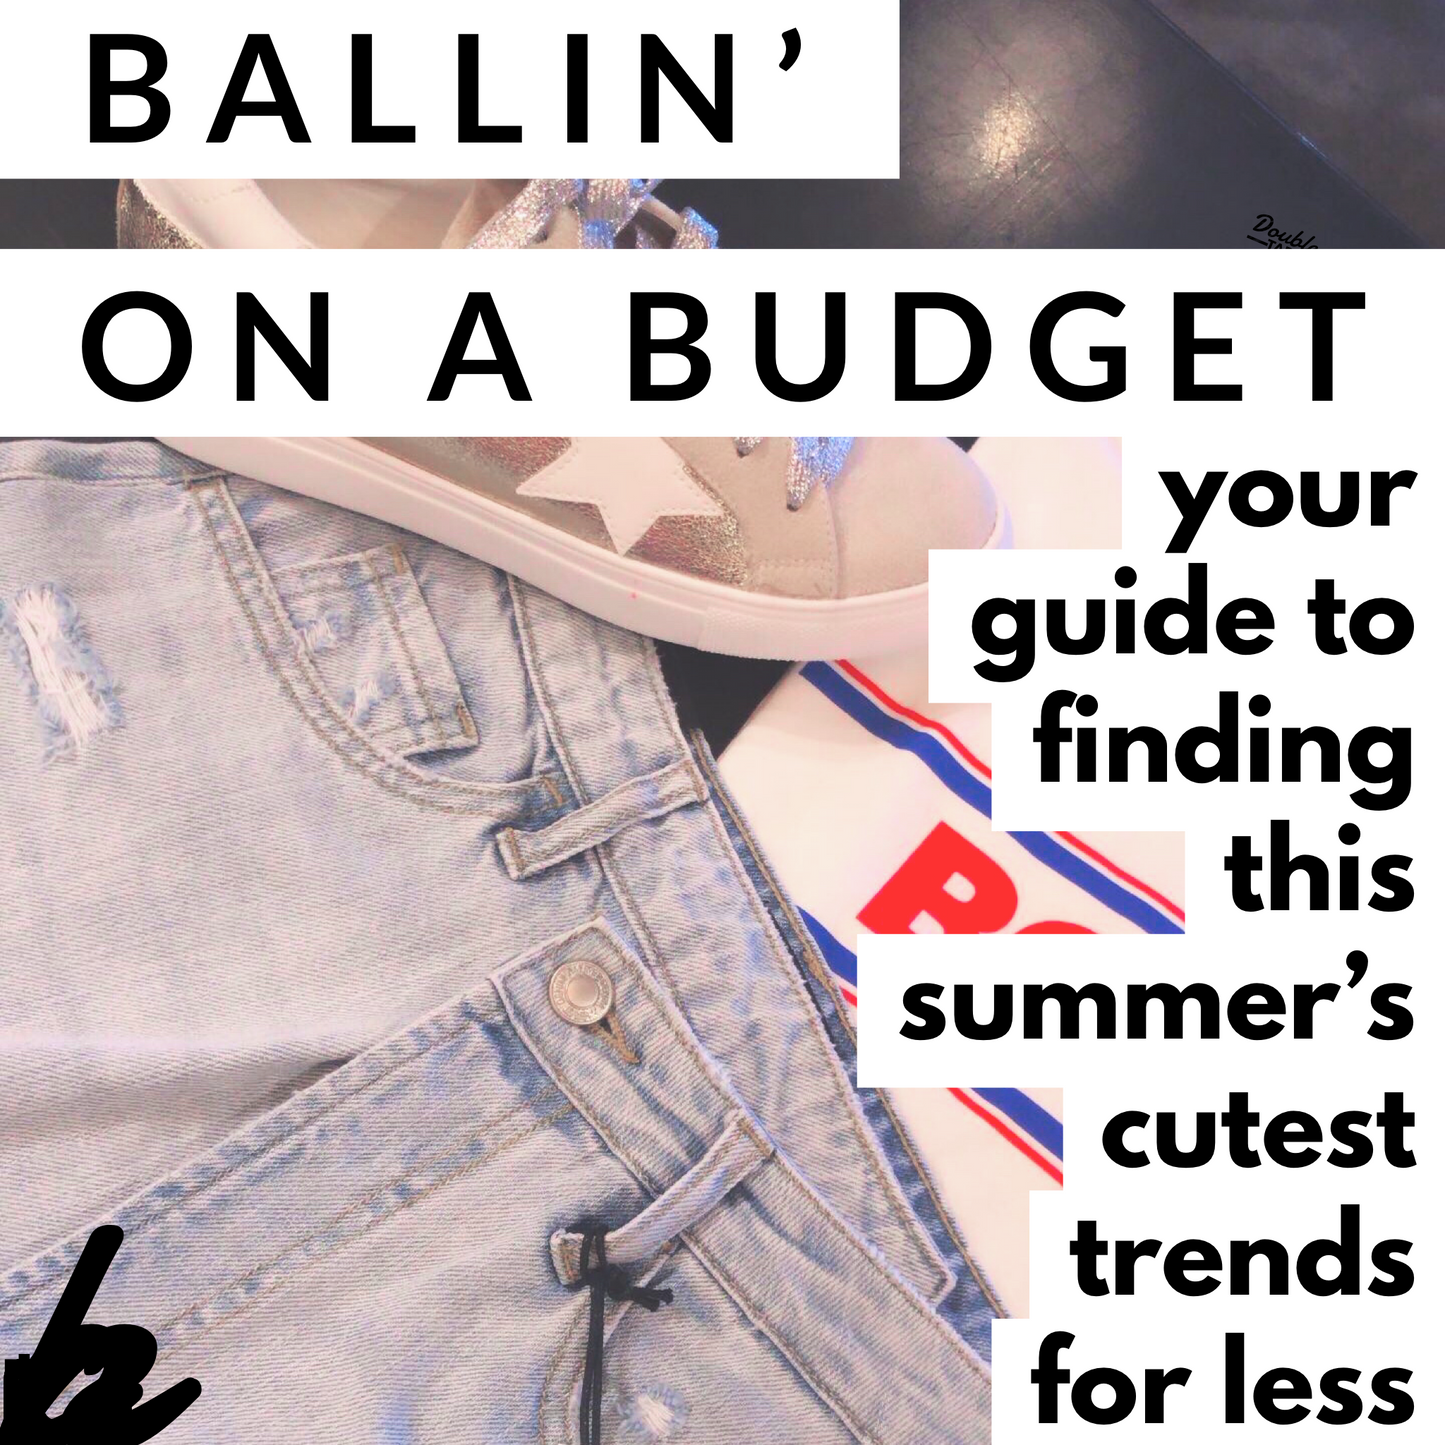 ballin' on a budget: your guide to finding this summer's cutest trends for less